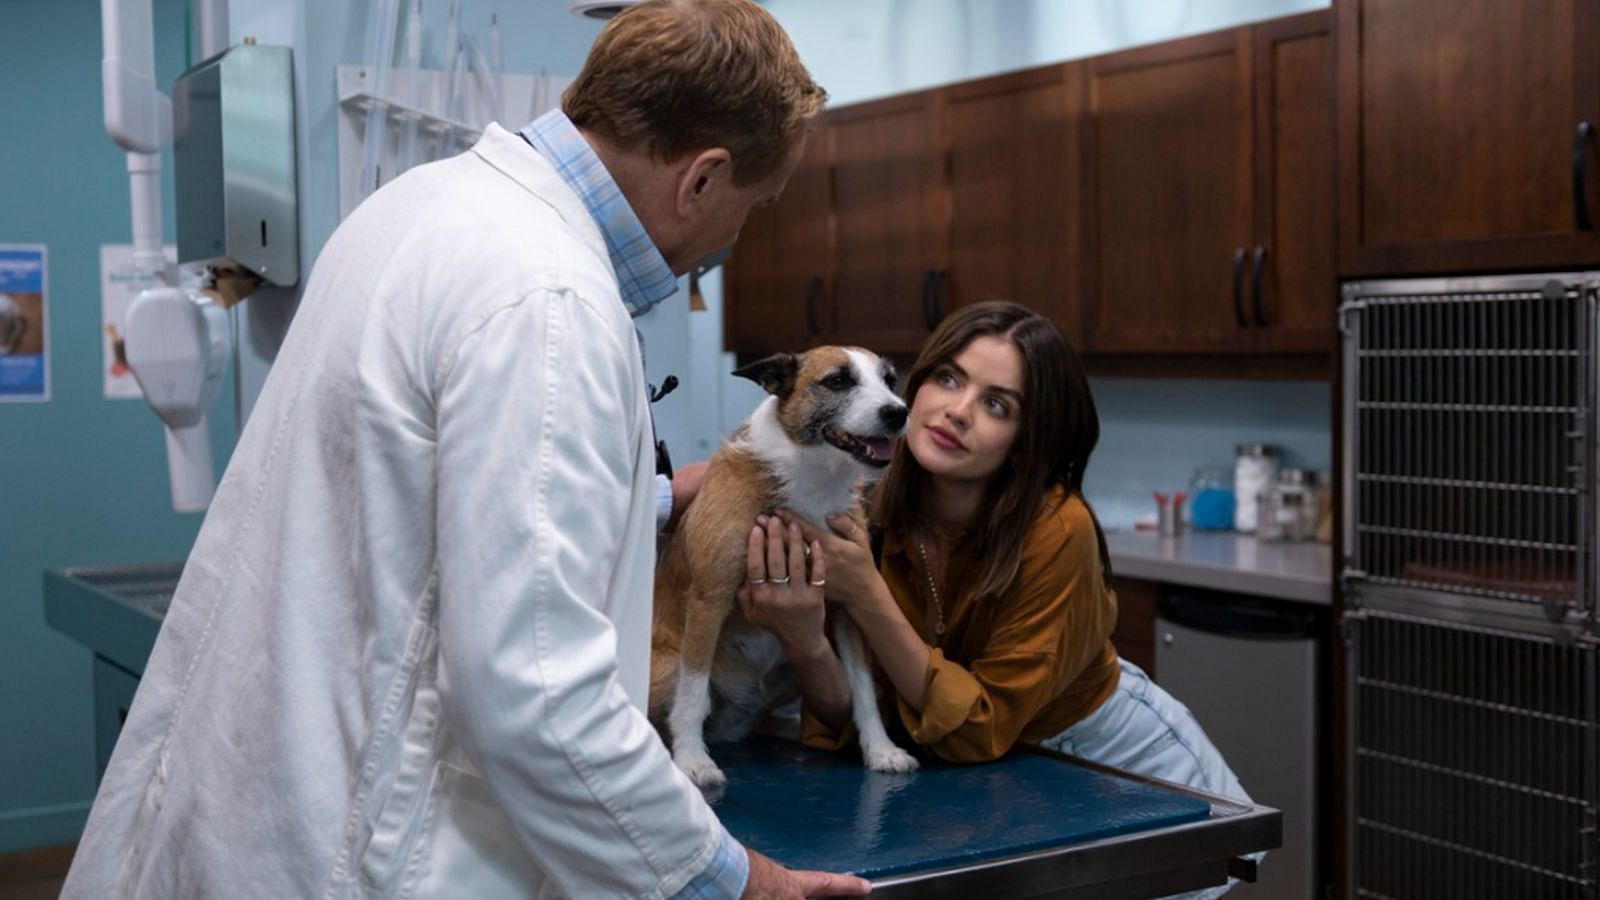 A still from Puppy Love (Image via Rotten Tomatoes)